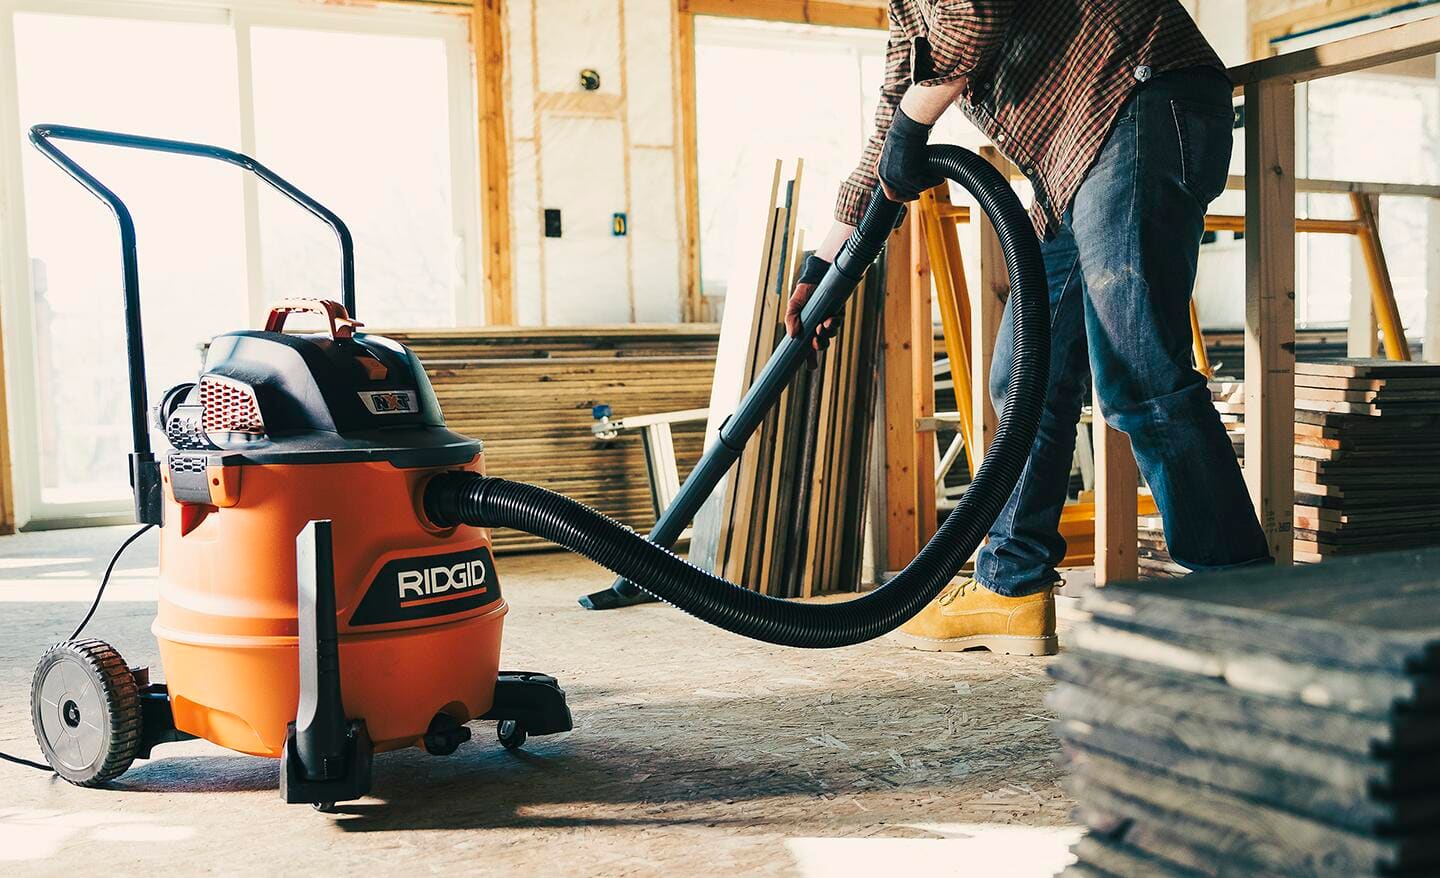 A person uses a shop vacuum to clean a subfloor.